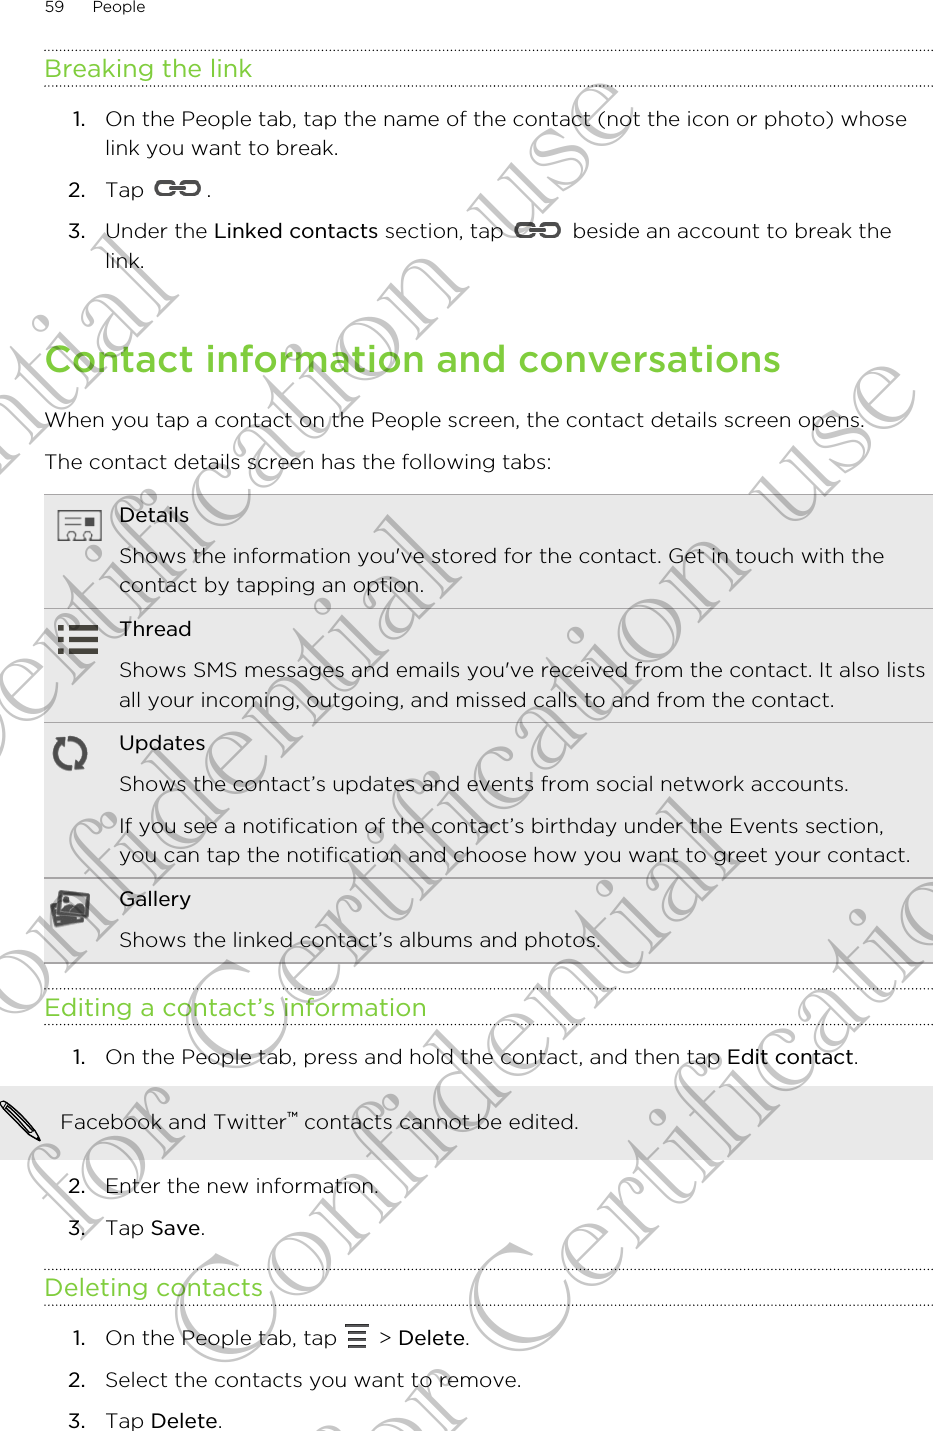 Breaking the link1. On the People tab, tap the name of the contact (not the icon or photo) whoselink you want to break.2. Tap  .3. Under the Linked contacts section, tap   beside an account to break thelink.Contact information and conversationsWhen you tap a contact on the People screen, the contact details screen opens.The contact details screen has the following tabs:DetailsShows the information you&apos;ve stored for the contact. Get in touch with thecontact by tapping an option.ThreadShows SMS messages and emails you&apos;ve received from the contact. It also listsall your incoming, outgoing, and missed calls to and from the contact.UpdatesShows the contact’s updates and events from social network accounts.If you see a notification of the contact’s birthday under the Events section,you can tap the notification and choose how you want to greet your contact.GalleryShows the linked contact’s albums and photos.Editing a contact’s information1. On the People tab, press and hold the contact, and then tap Edit contact. Facebook and Twitter™ contacts cannot be edited.2. Enter the new information.3. Tap Save.Deleting contacts1. On the People tab, tap   &gt; Delete.2. Select the contacts you want to remove.3. Tap Delete.59 PeopleConfidential for Certification use Confidential for Certification use Confidential for Certification use 